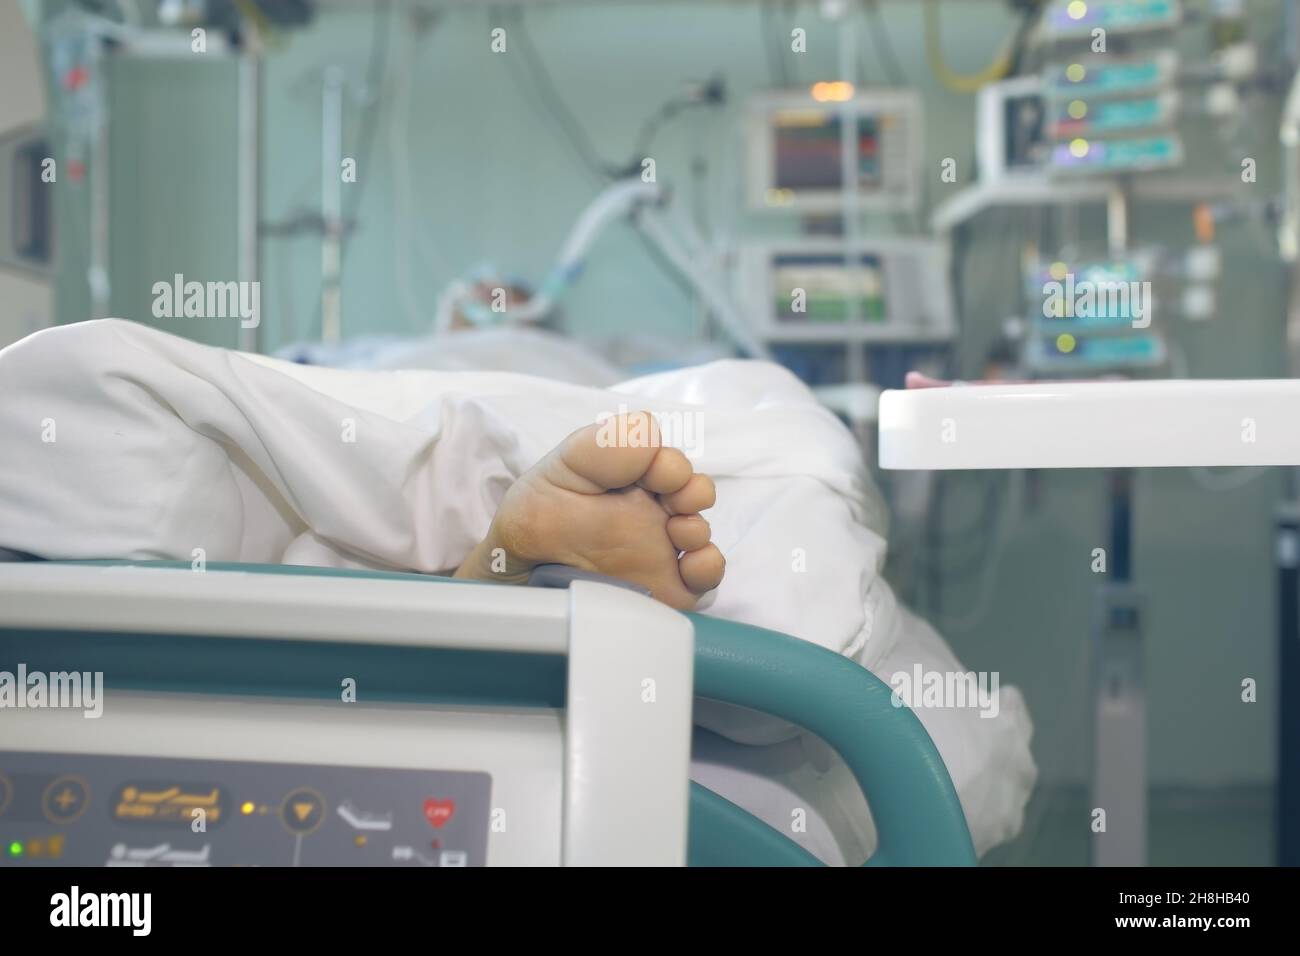 Patient in serious condition connected to the life support devices. Stock Photo